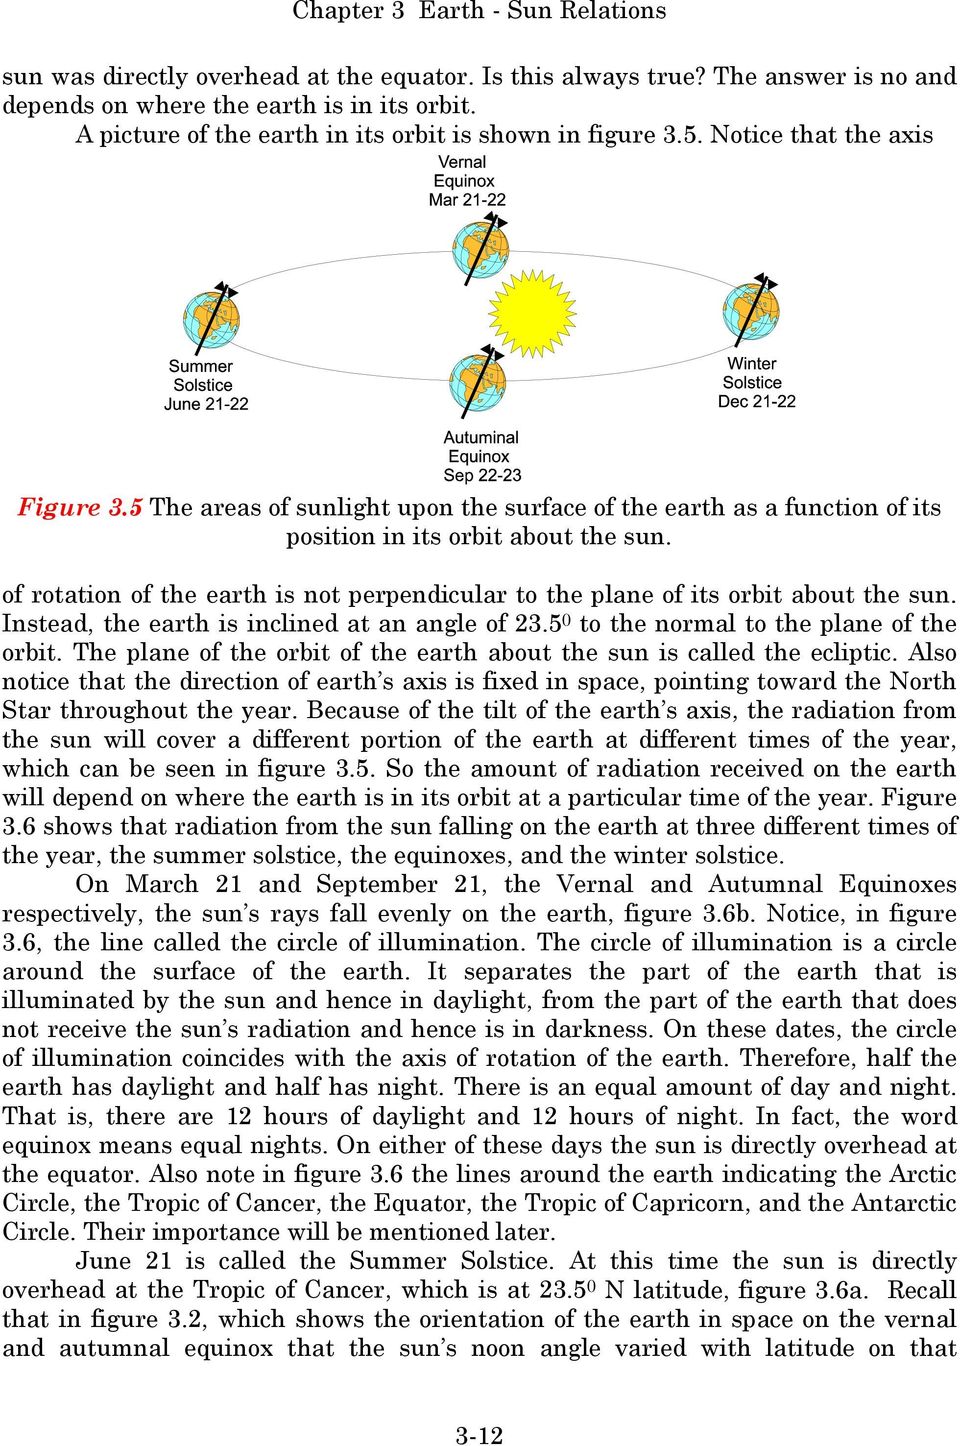 of rotation of the earth is not perpendicular to the plane of its orbit about the sun. Instead, the earth is inclined at an angle of 23.5 0 to the normal to the plane of the orbit.